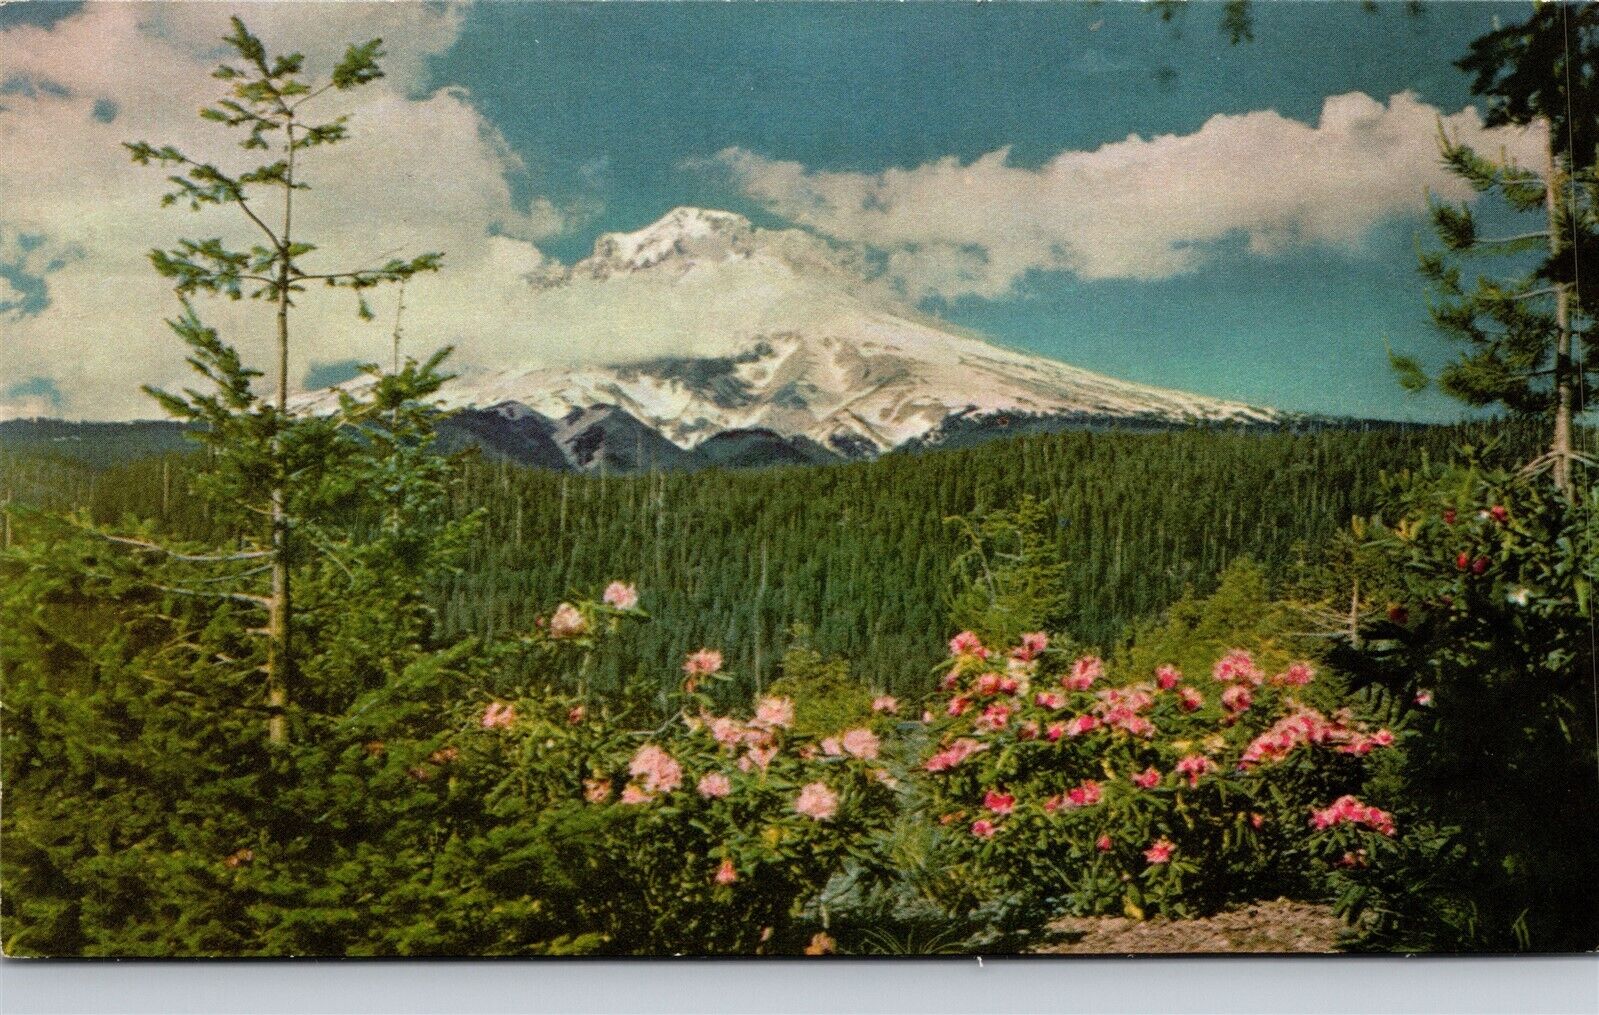 Rhododendron Flowers Mt Mount Hood OR 1939 Union Oil 76 Ad Vtg Postcard View